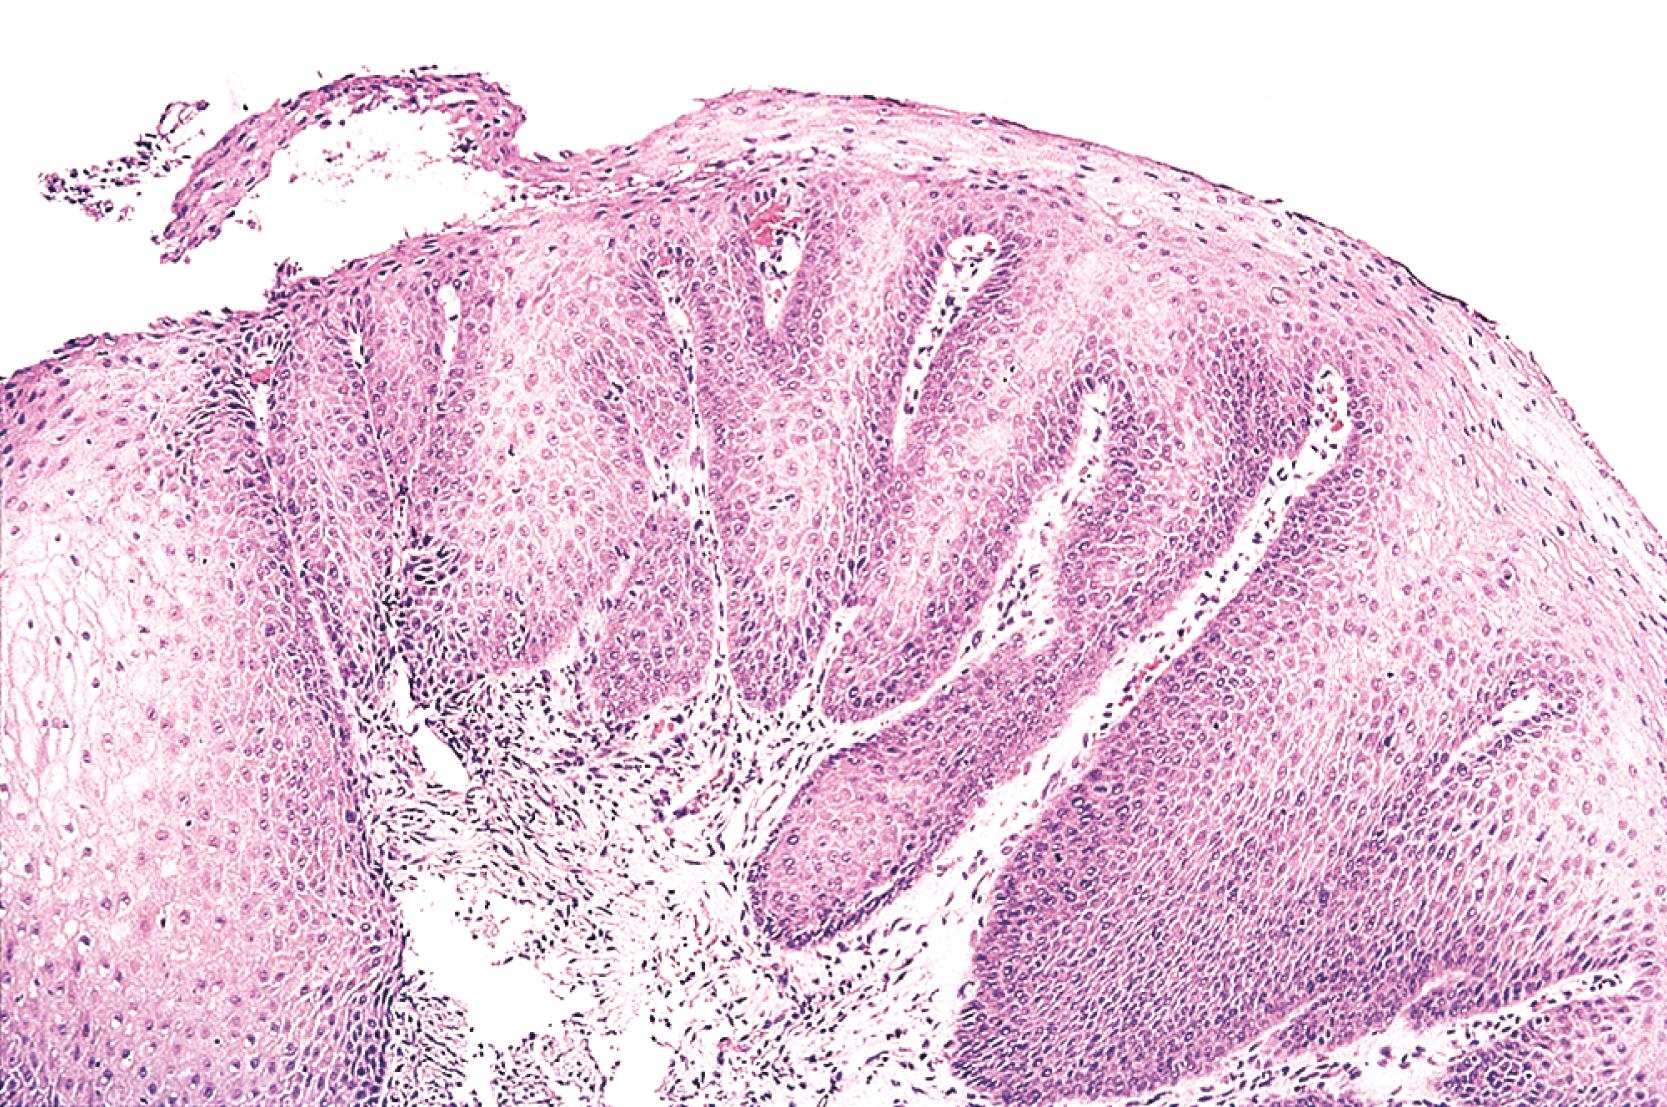 FIGURE 19.1, Squamous-lined inflammatory polyps have an endophytic growth pattern characterized by elongated tongues of benign squamous epithelium extending into the underlying lamina propria. These lesions may represent a subtype of squamous papilloma.